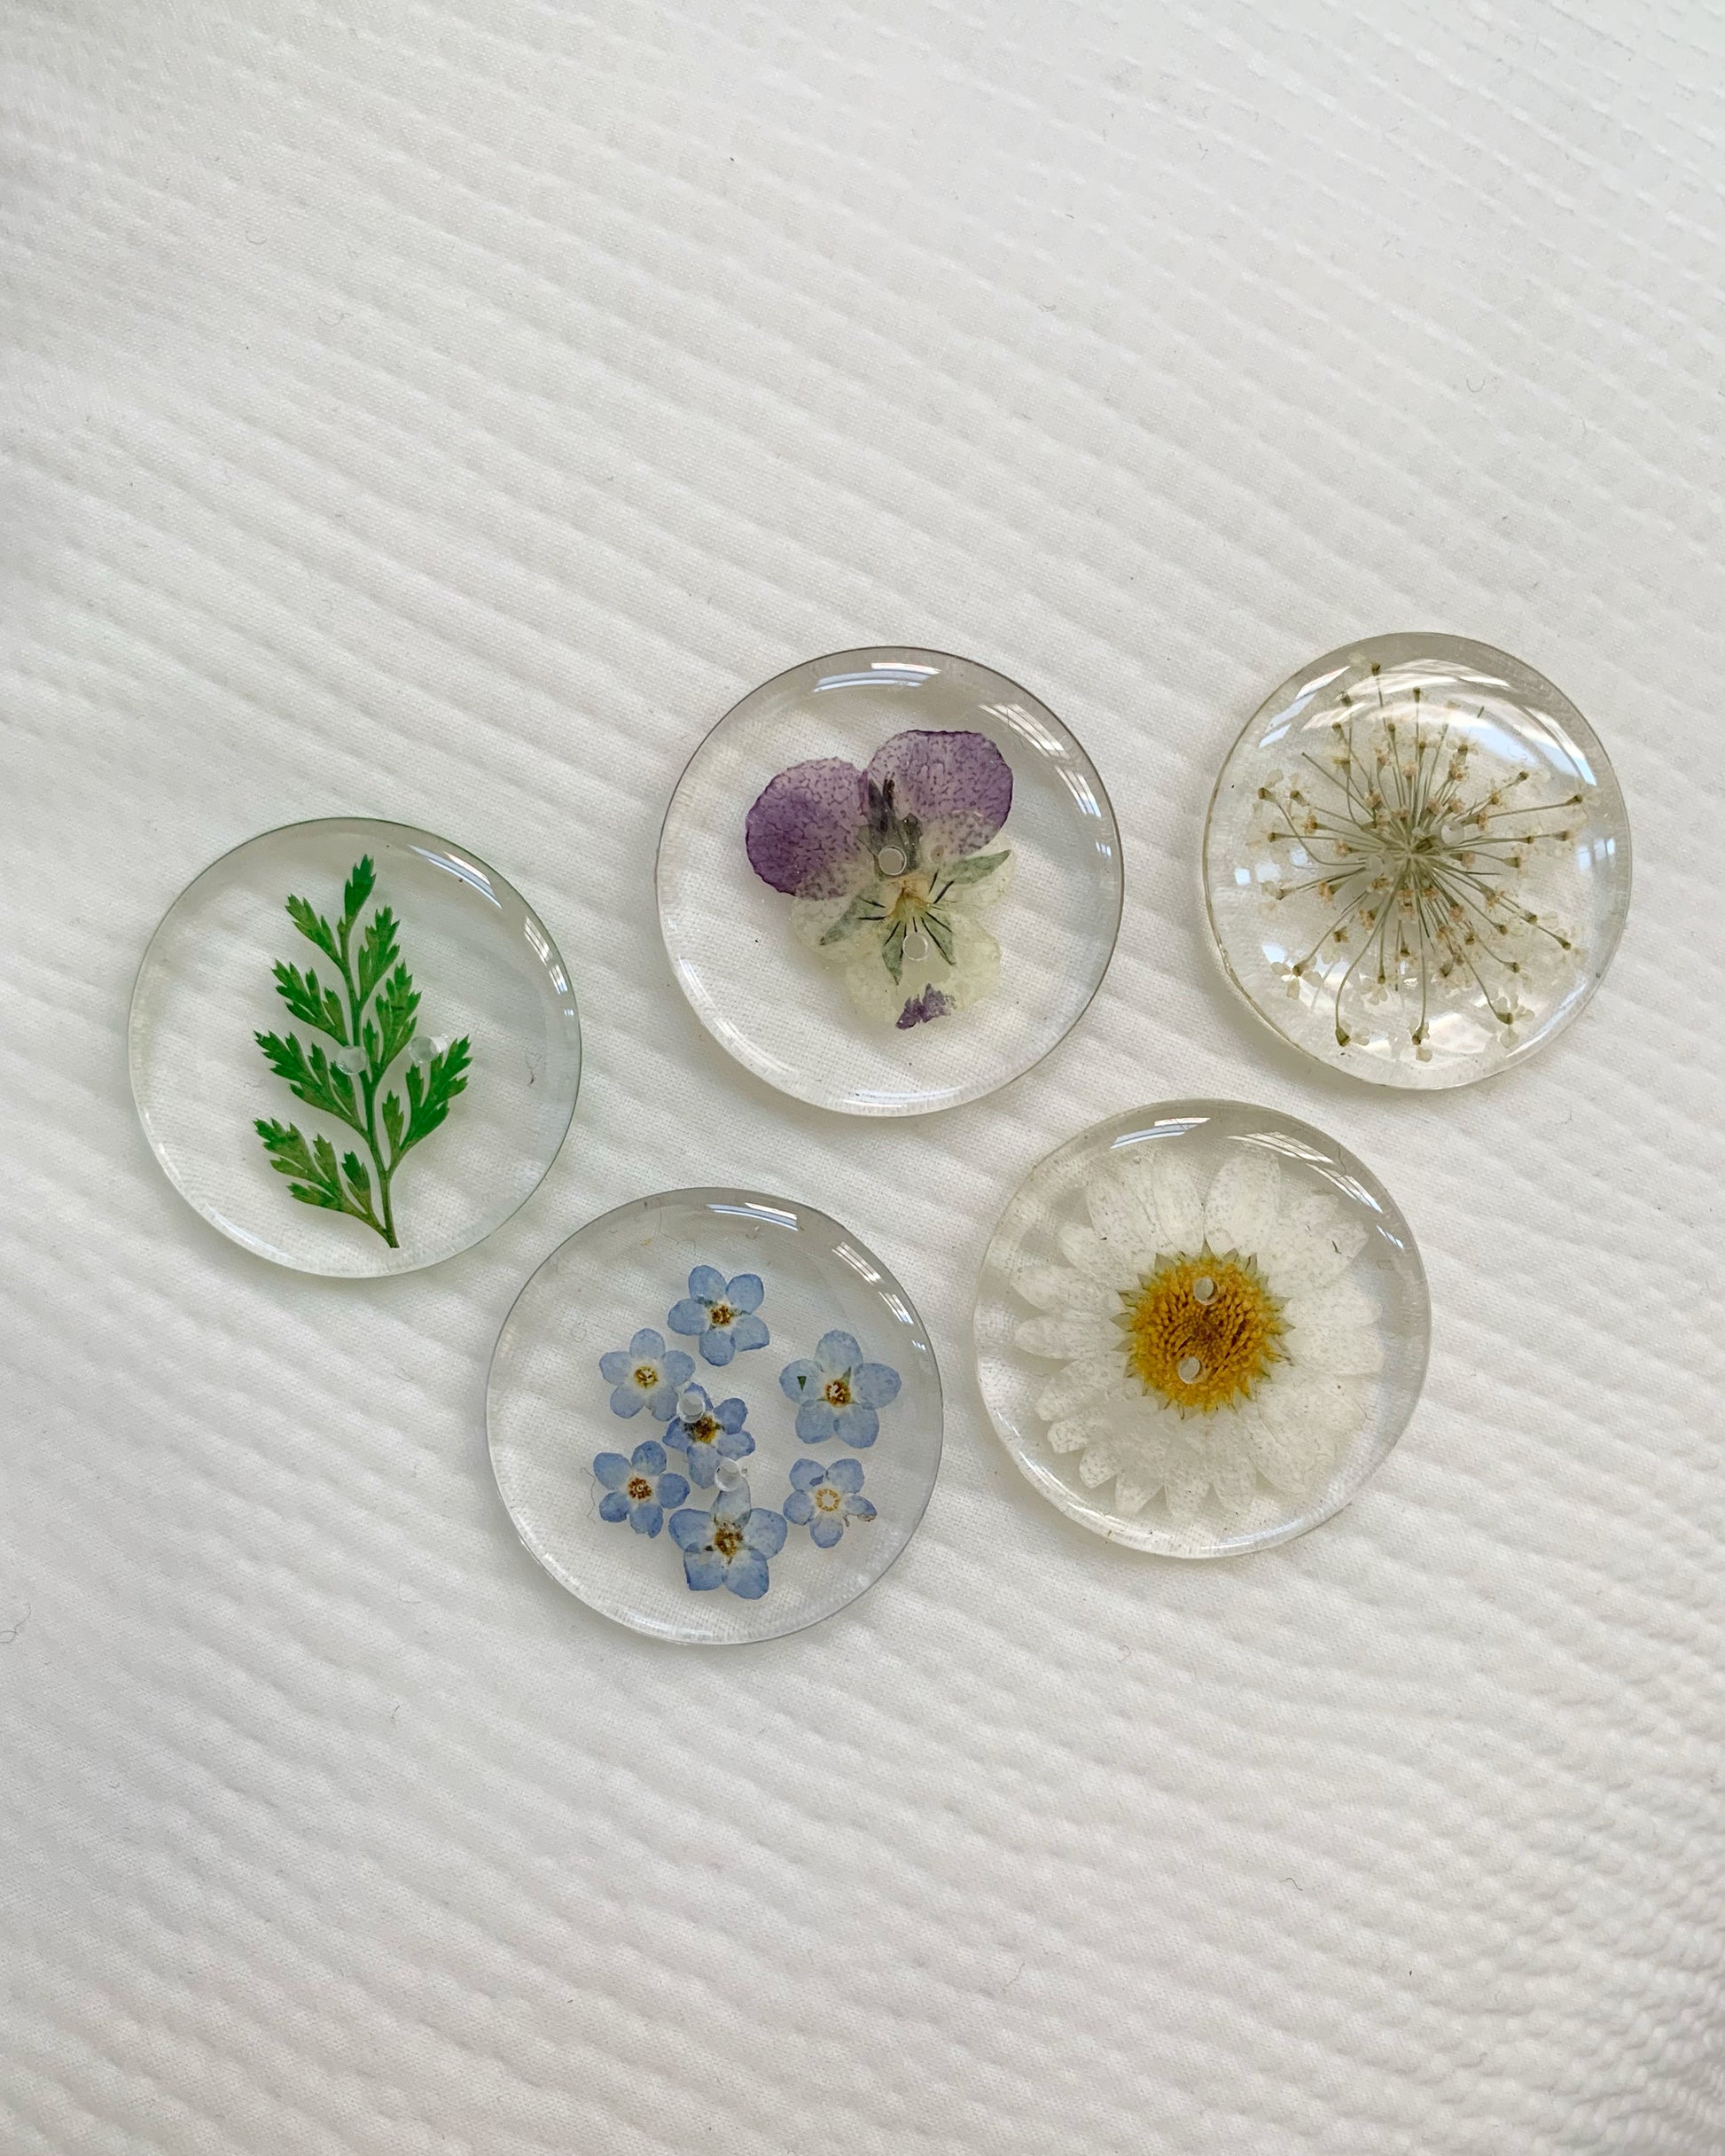 Assorted botanical plants preserved in round buttons (1 daisy, 1 pansy, 1 fern, 1 Queen Anne's lace, 1 forget-me-not)